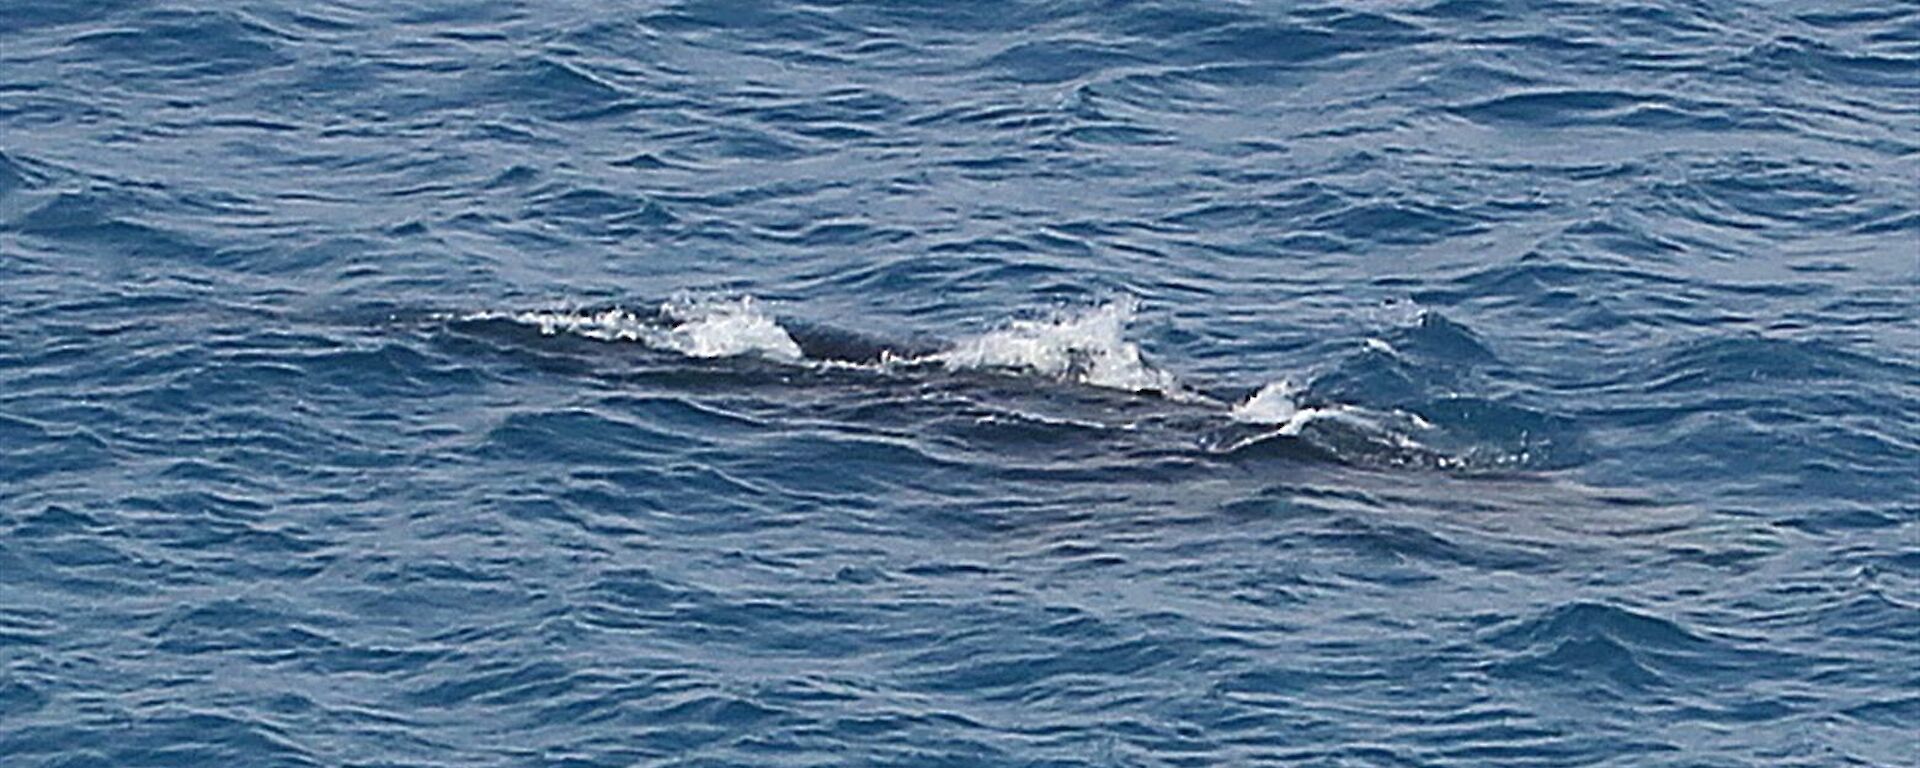 An unidentified whale is seen just under the water.